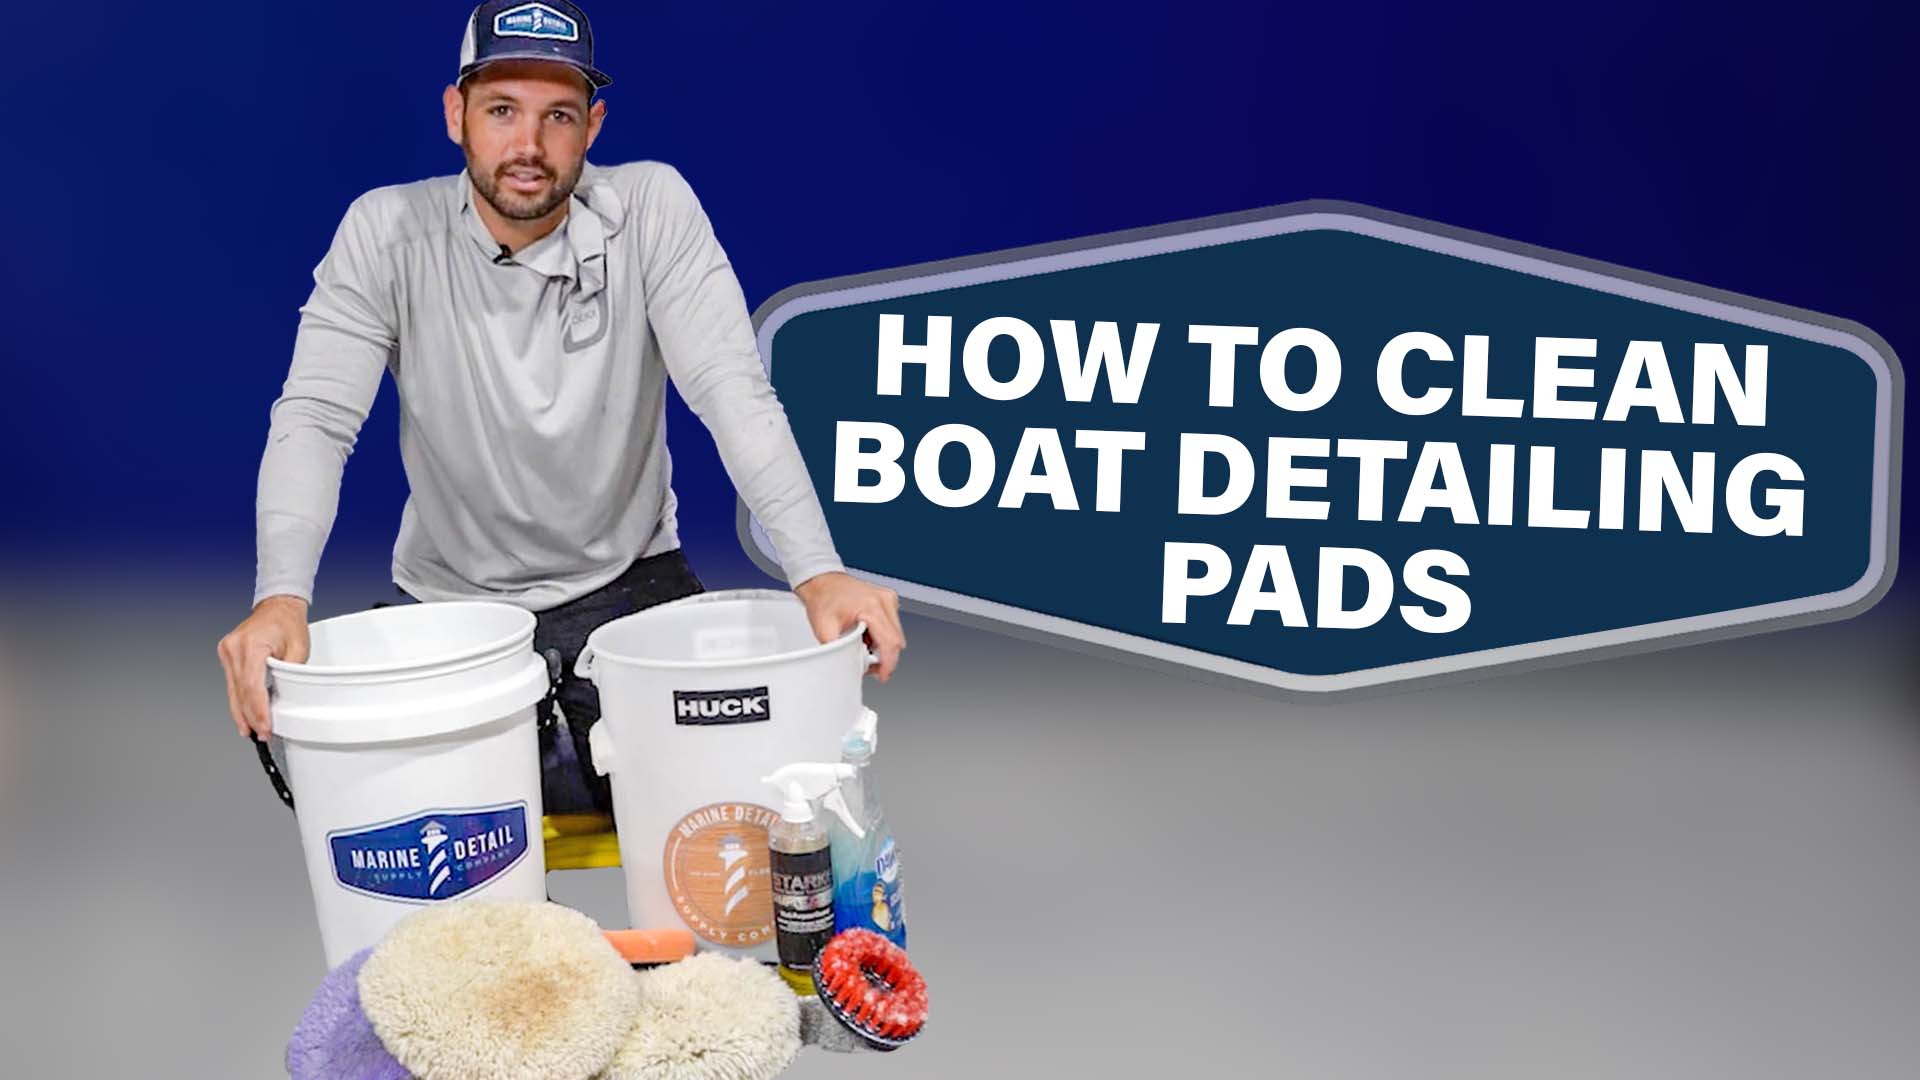 How to Clean Boat Detailing Pads